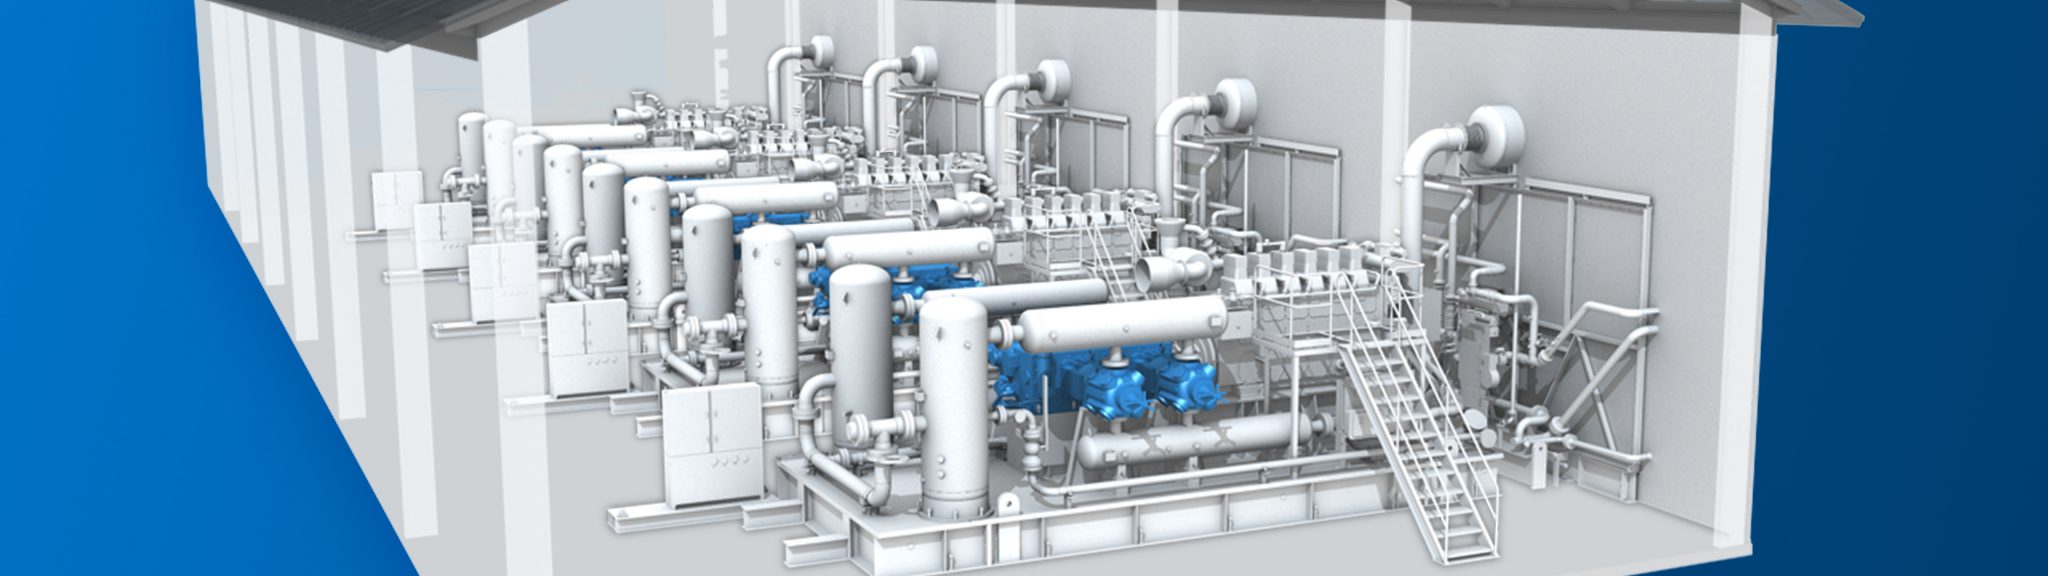 A rendering of the inside of a natural gas storage unit